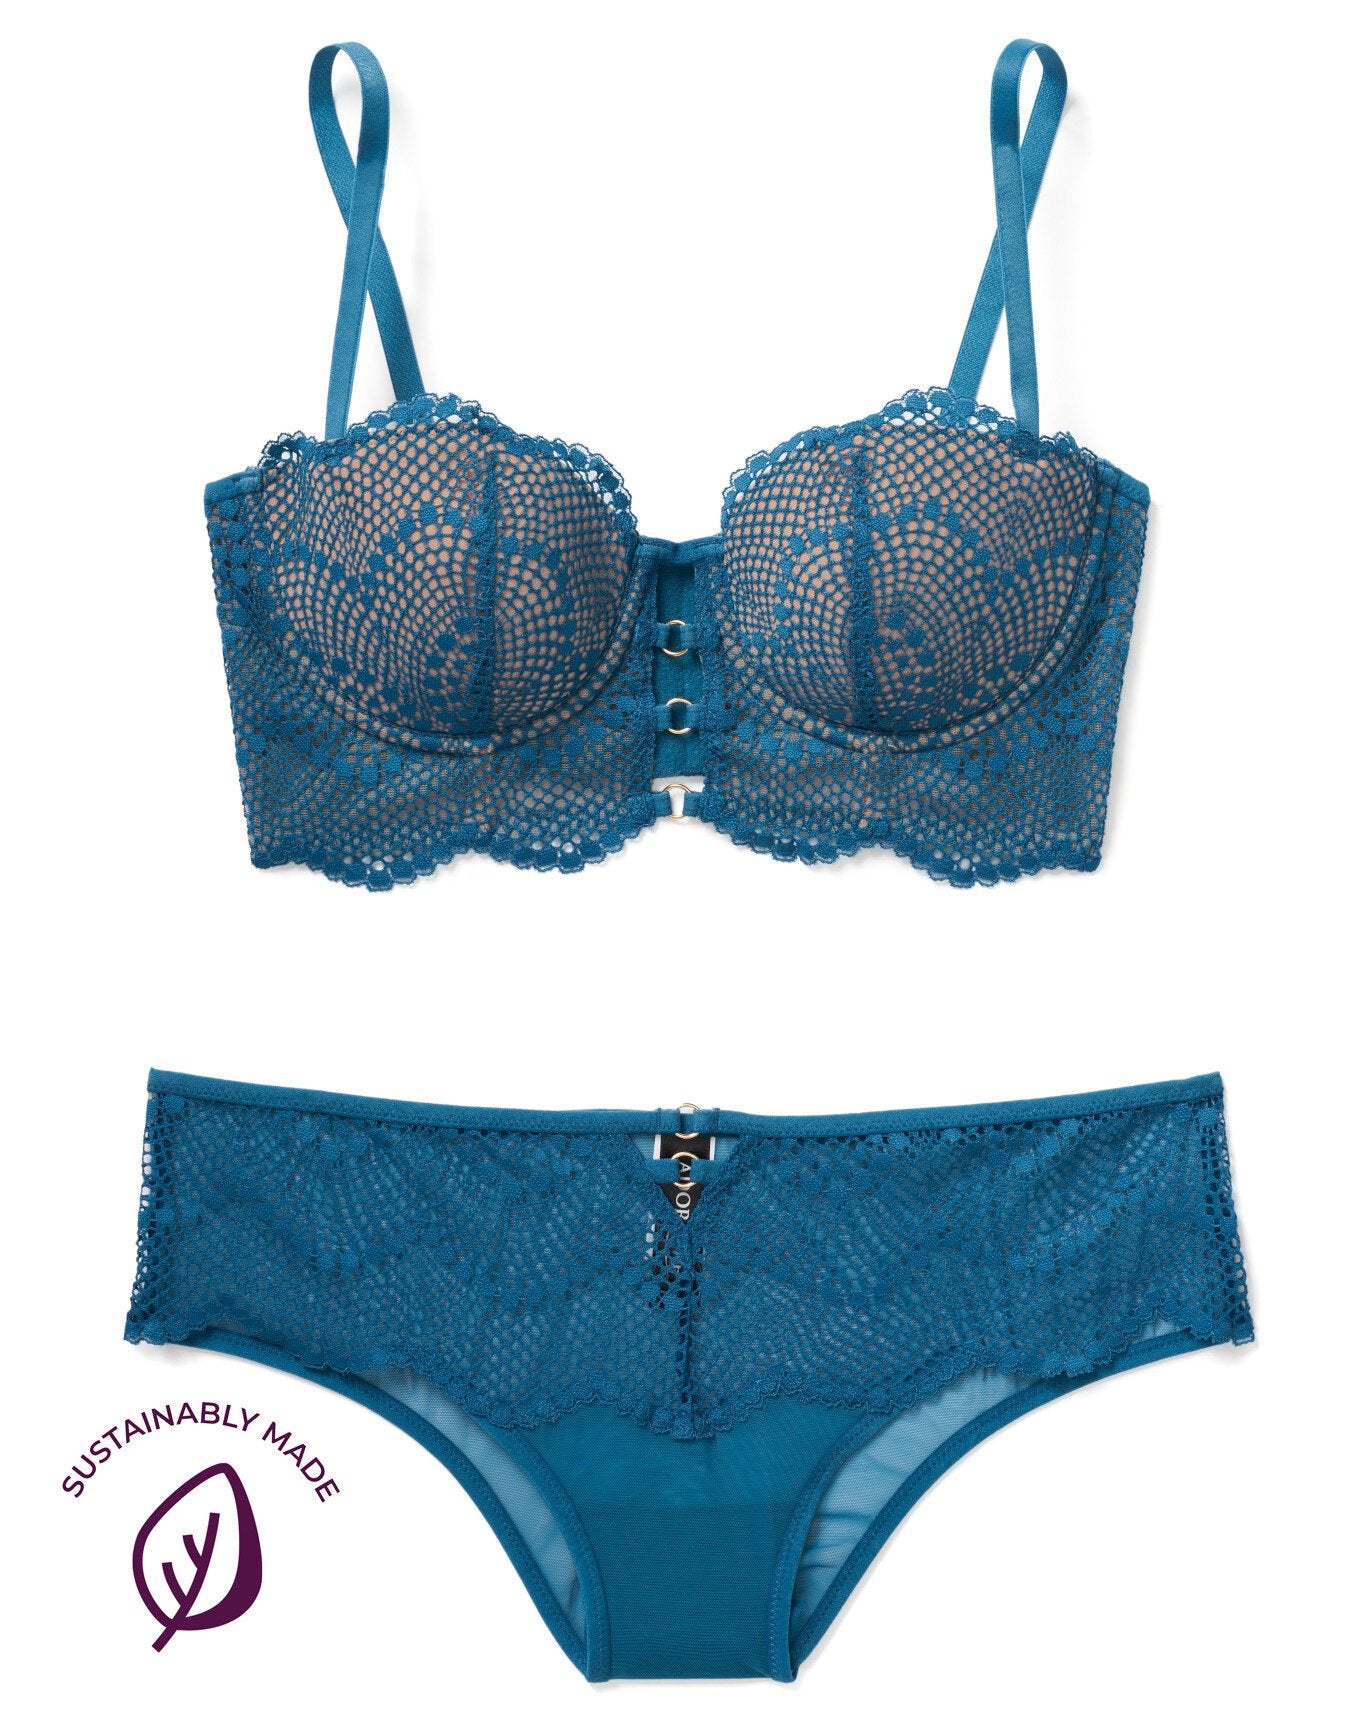 Adore Me Margaritte Push-Up Balconette in color Blue Sapphire and shape balconette